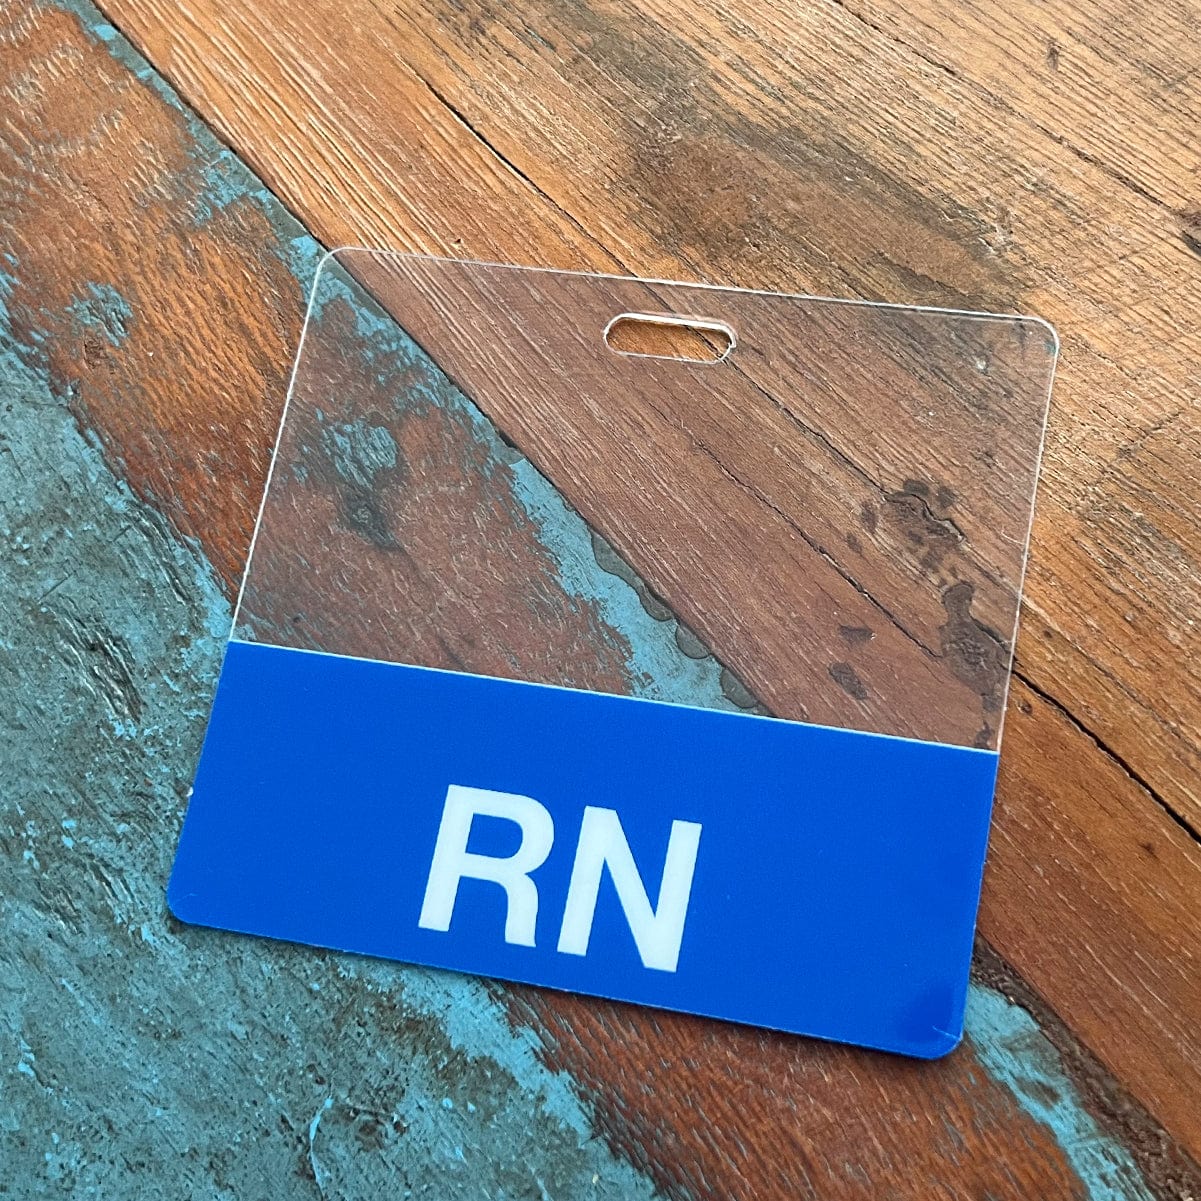 A Clear RN Badge Buddy - Horizontal ID Badge Backer for Nurses - Double Sided Print with a blue bottom, featuring the letters "RN" printed in white, serves as an ideal RN Badge Buddy on a wooden and blue surface.